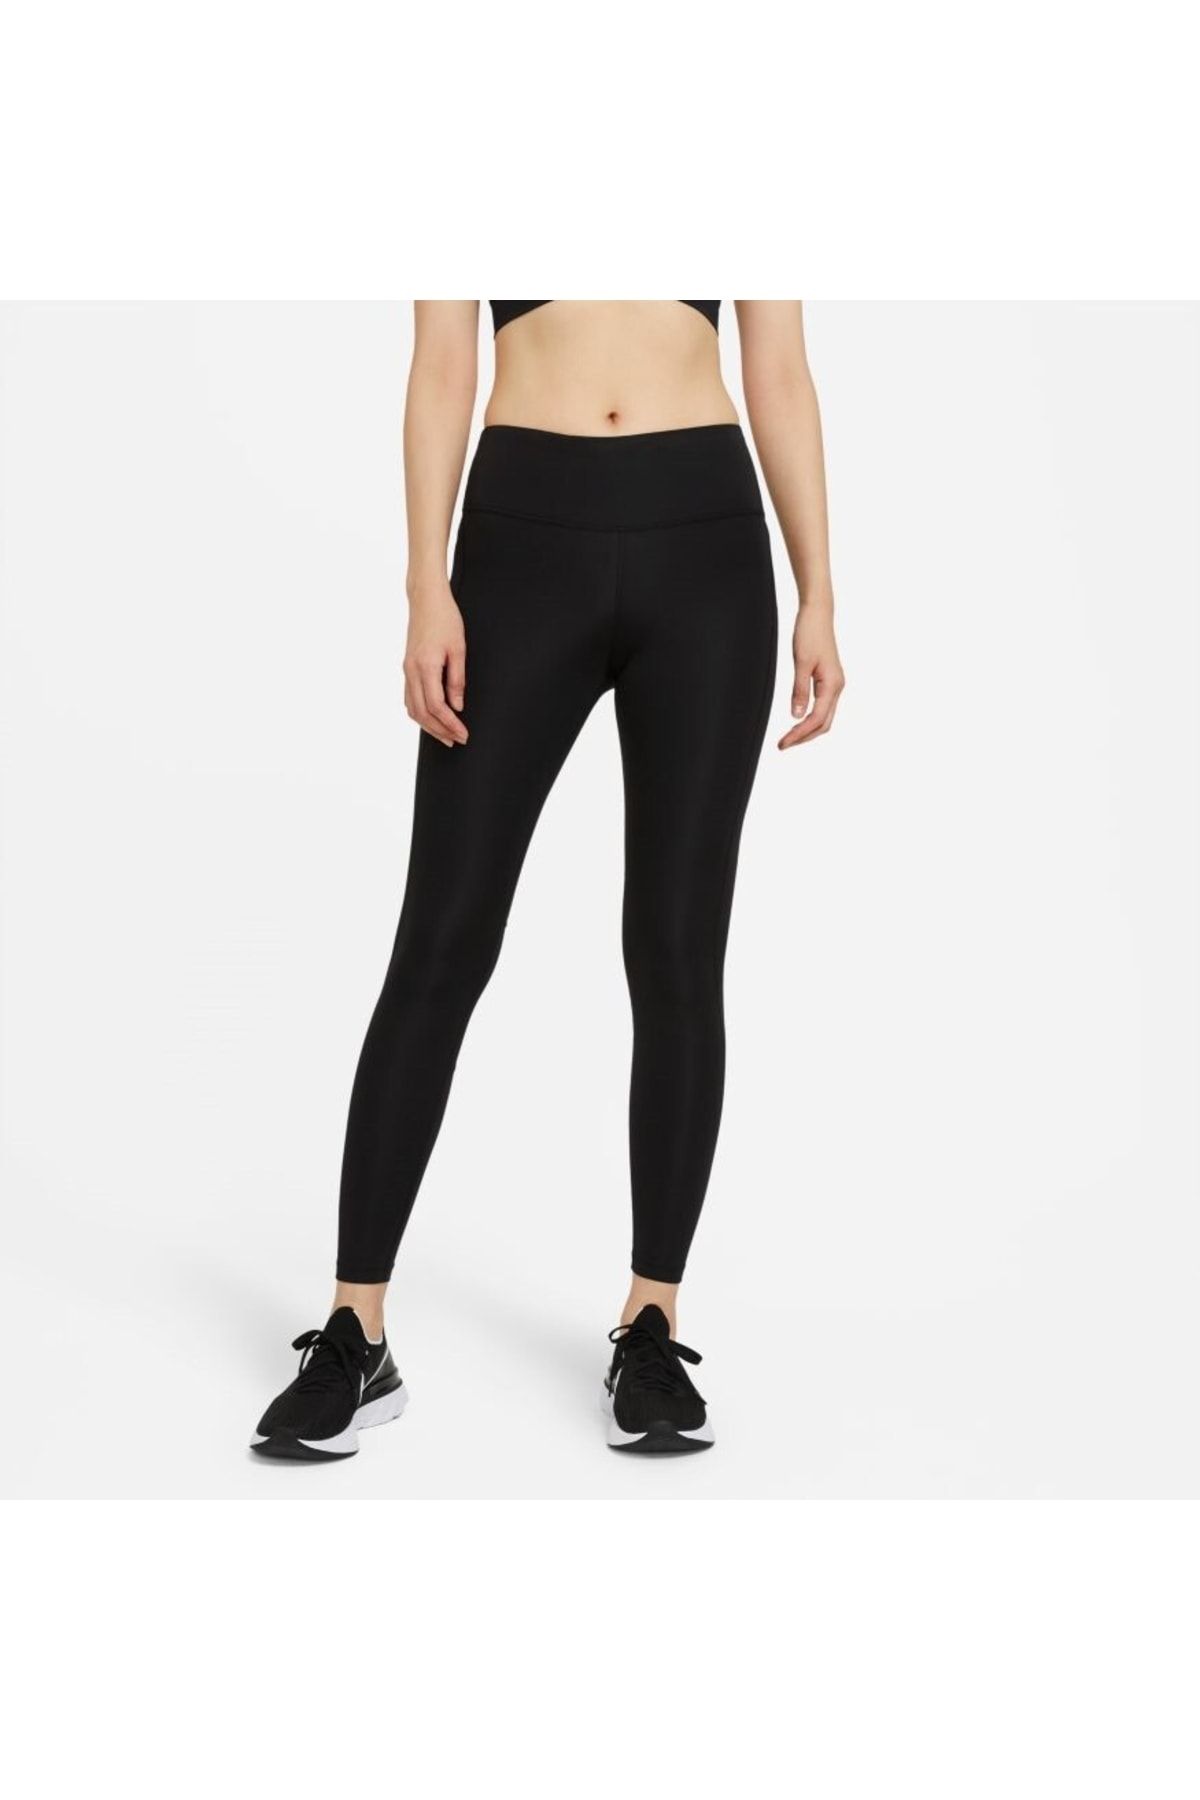 Nike Epic Fast Mid-Rise Running Women's Tights cz9240 - Trendyol